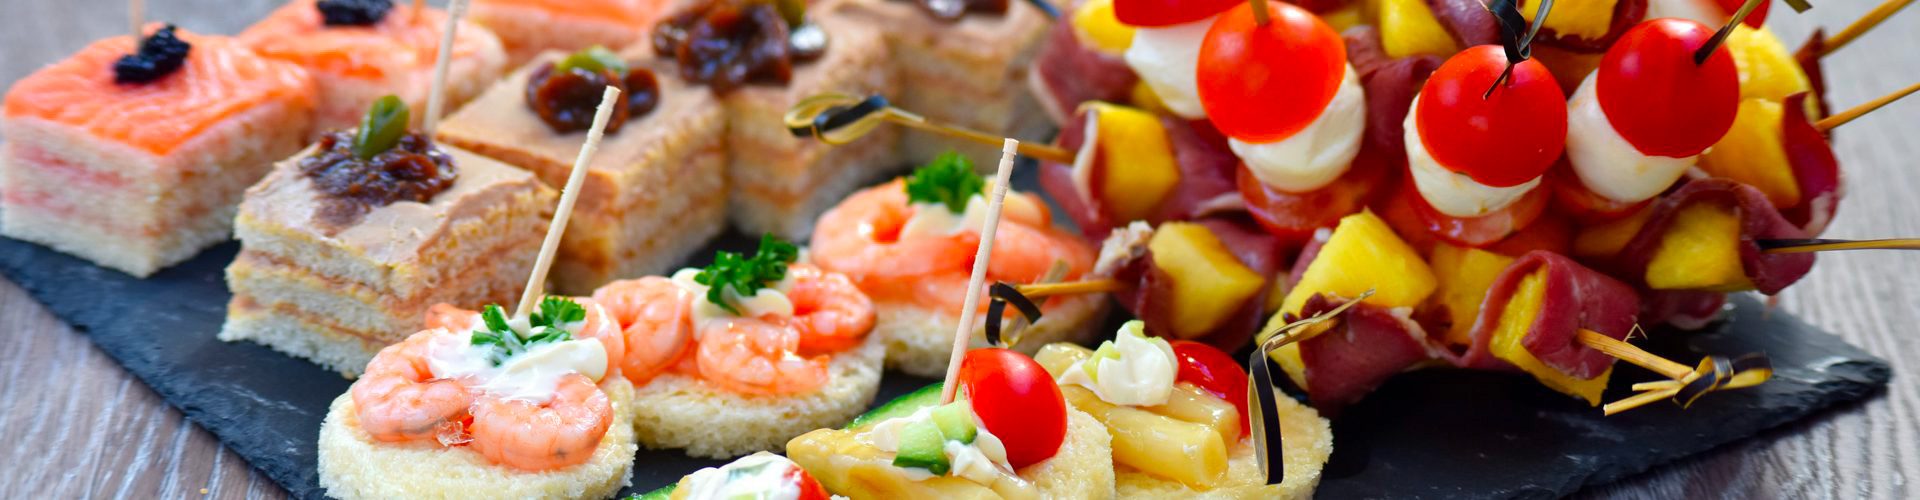 canapes-et-minies-brochettes-1